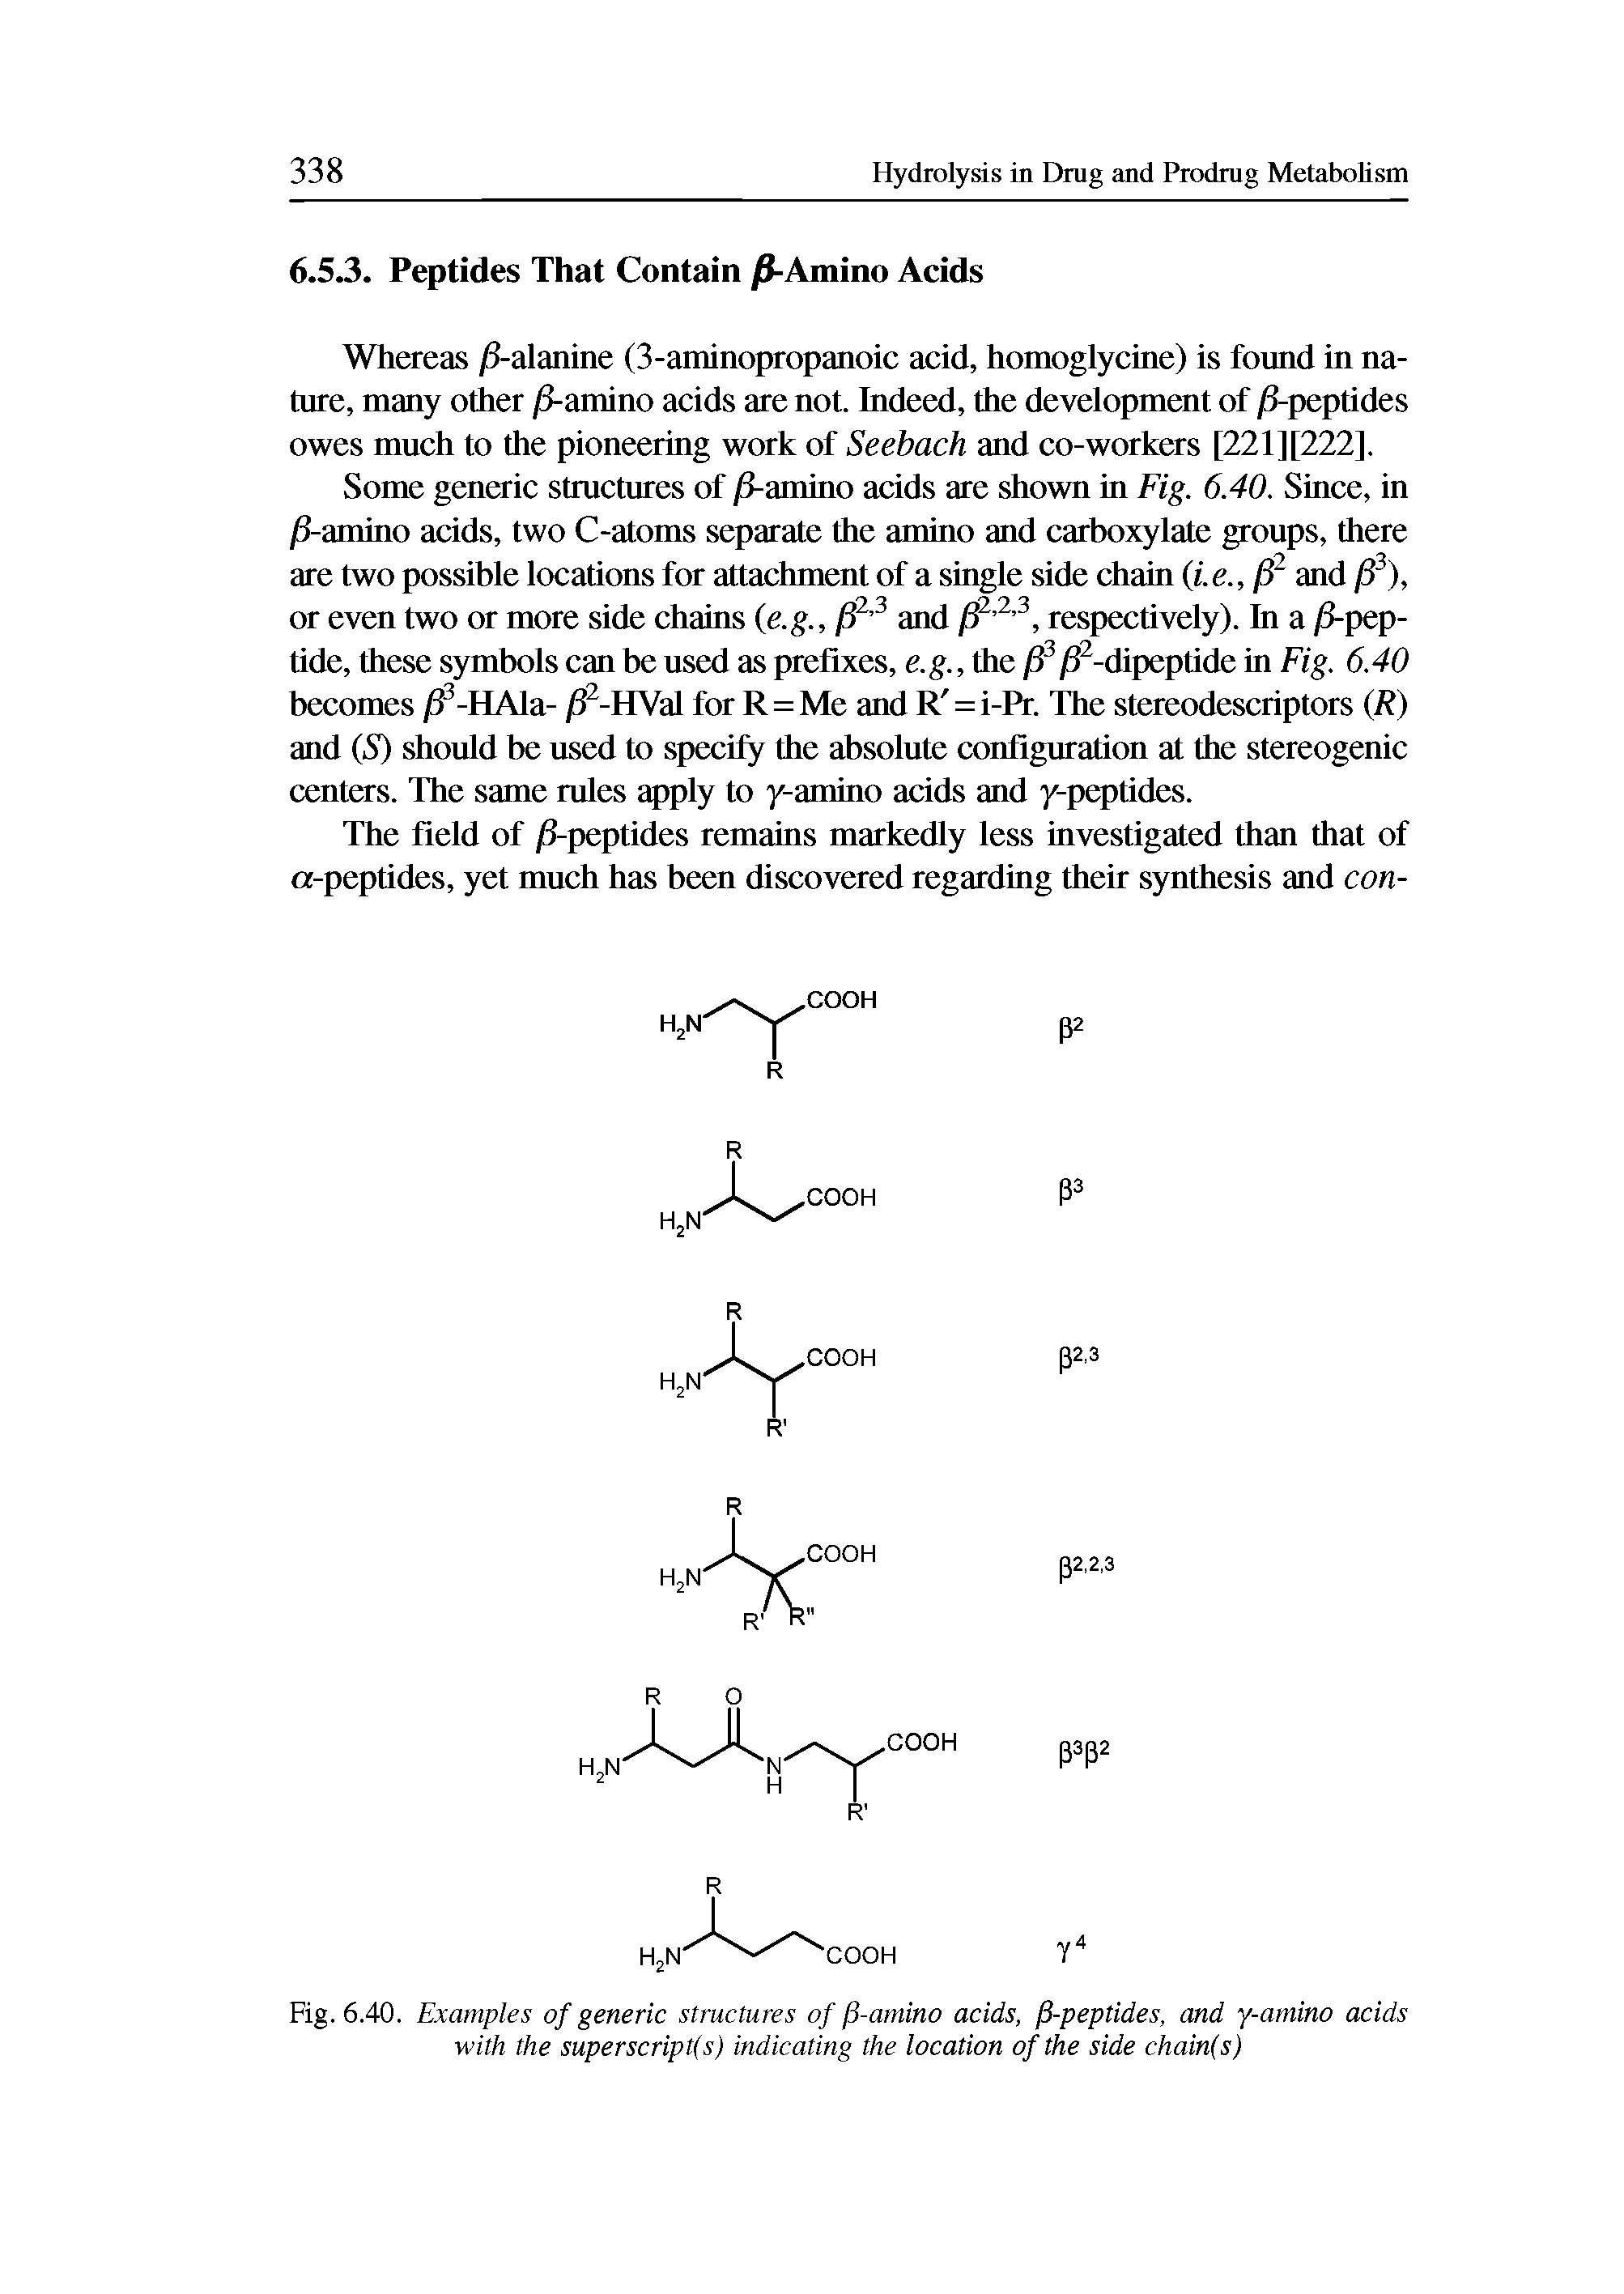 Fig. 6.40. Examples of generic structures of /3-amino acids, /3-peptides, and y-amino acids with the superscripts) indicating the location of the side chain(s)...